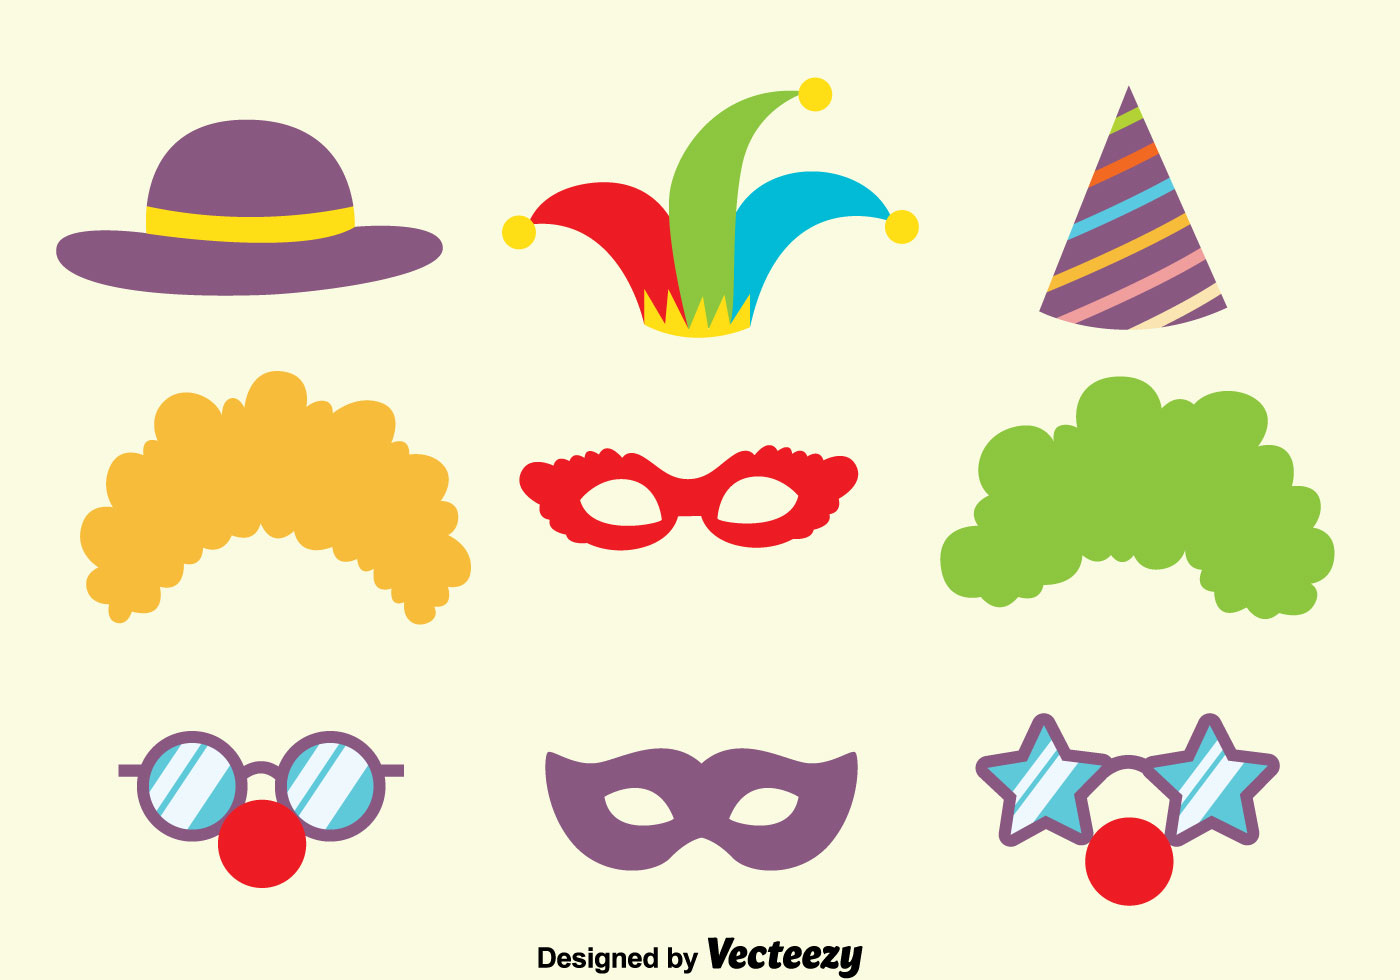 free clipart vector downloads - photo #38